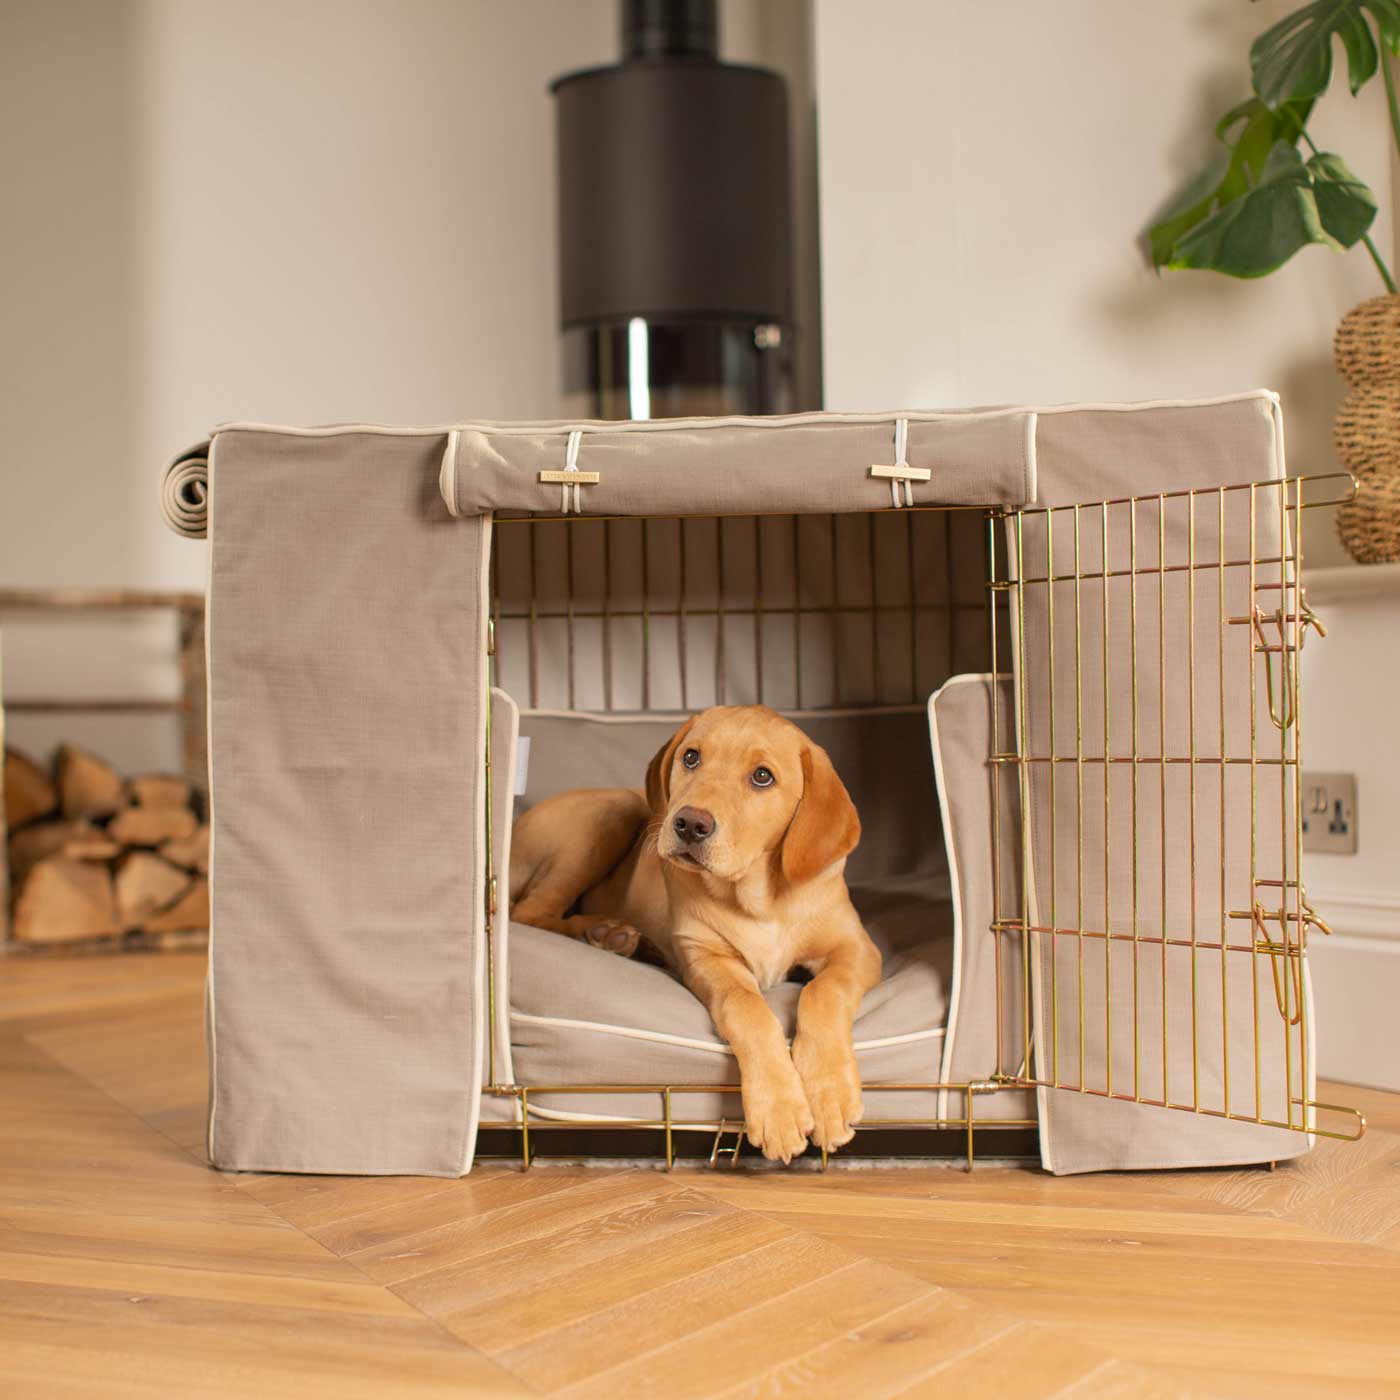 Luxury Heavy Duty Dog Cage, In Stunning Savanna Stone Cage Set, The Perfect Dog Cage Set For Building The Ultimate Pet Den! Dog Cage Cover Available To Personalize at Lords & Labradors